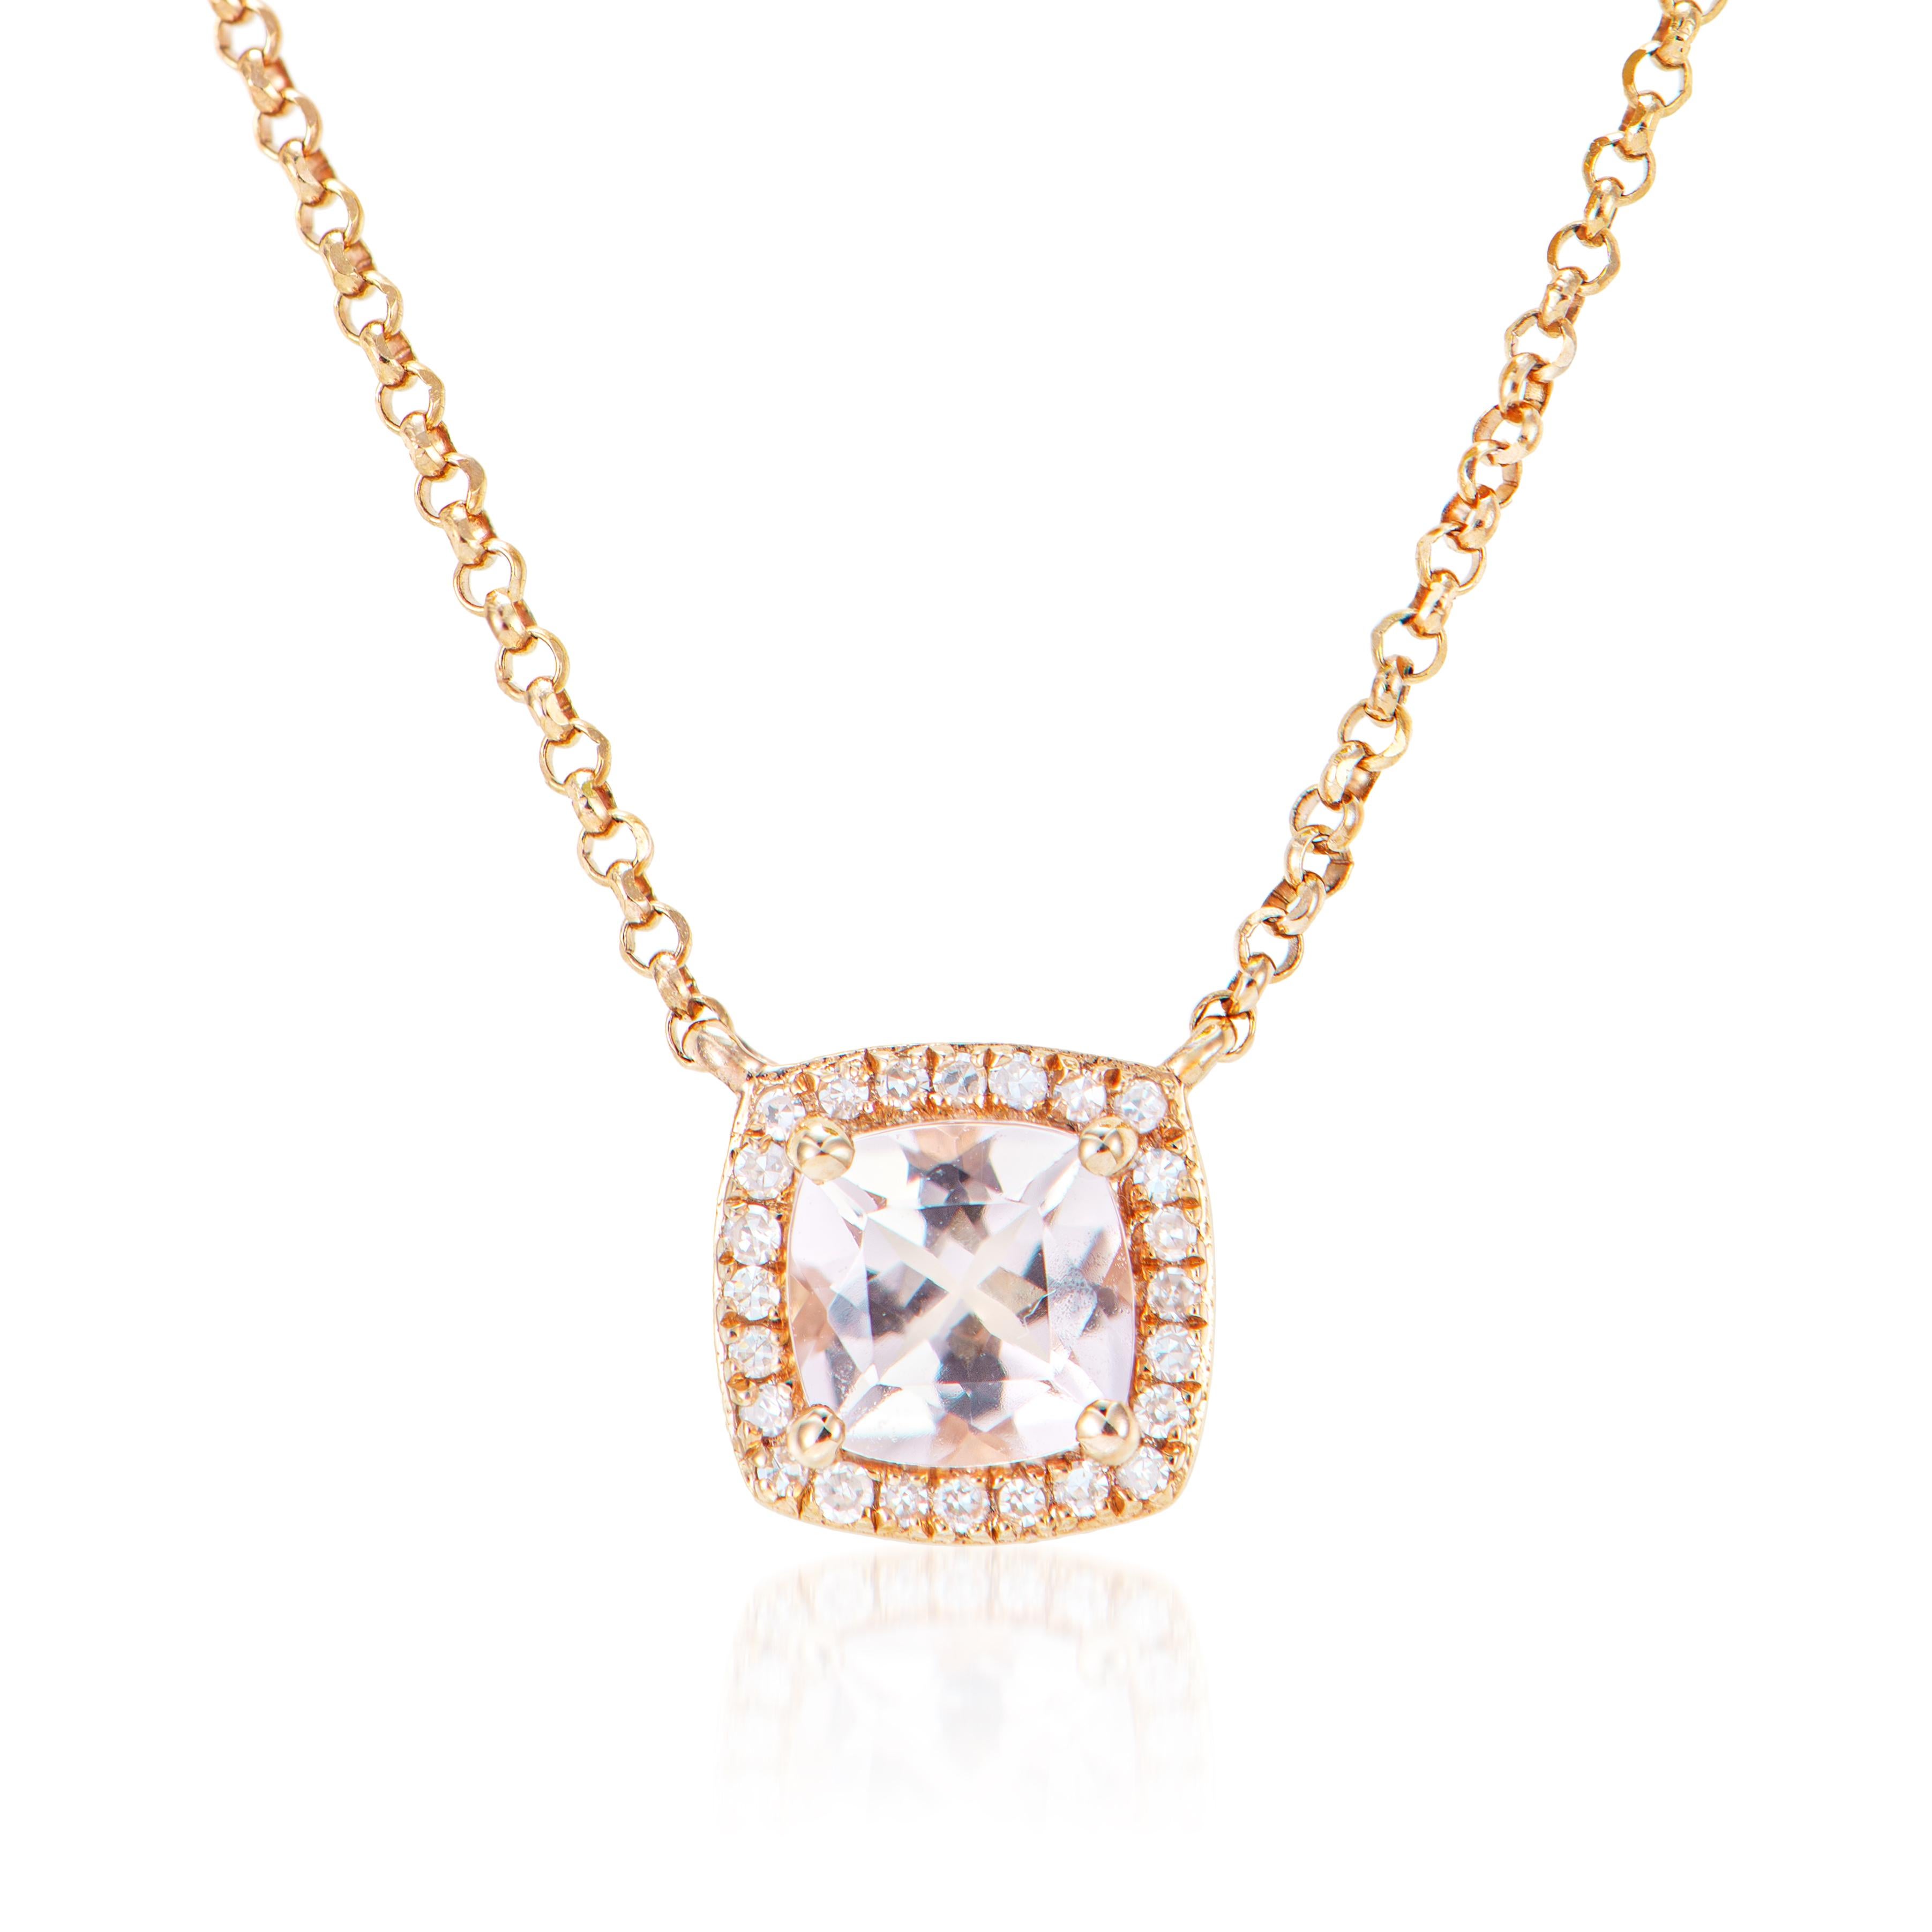 Presented A lovely collection of gems, including Amethyst, Peridot, Rhodolite, Sky Blue Topaz, Swiss Blue Topaz and Morganite is perfect for people who value quality and want to wear it to any occasion or celebration. The yellow gold Morganite